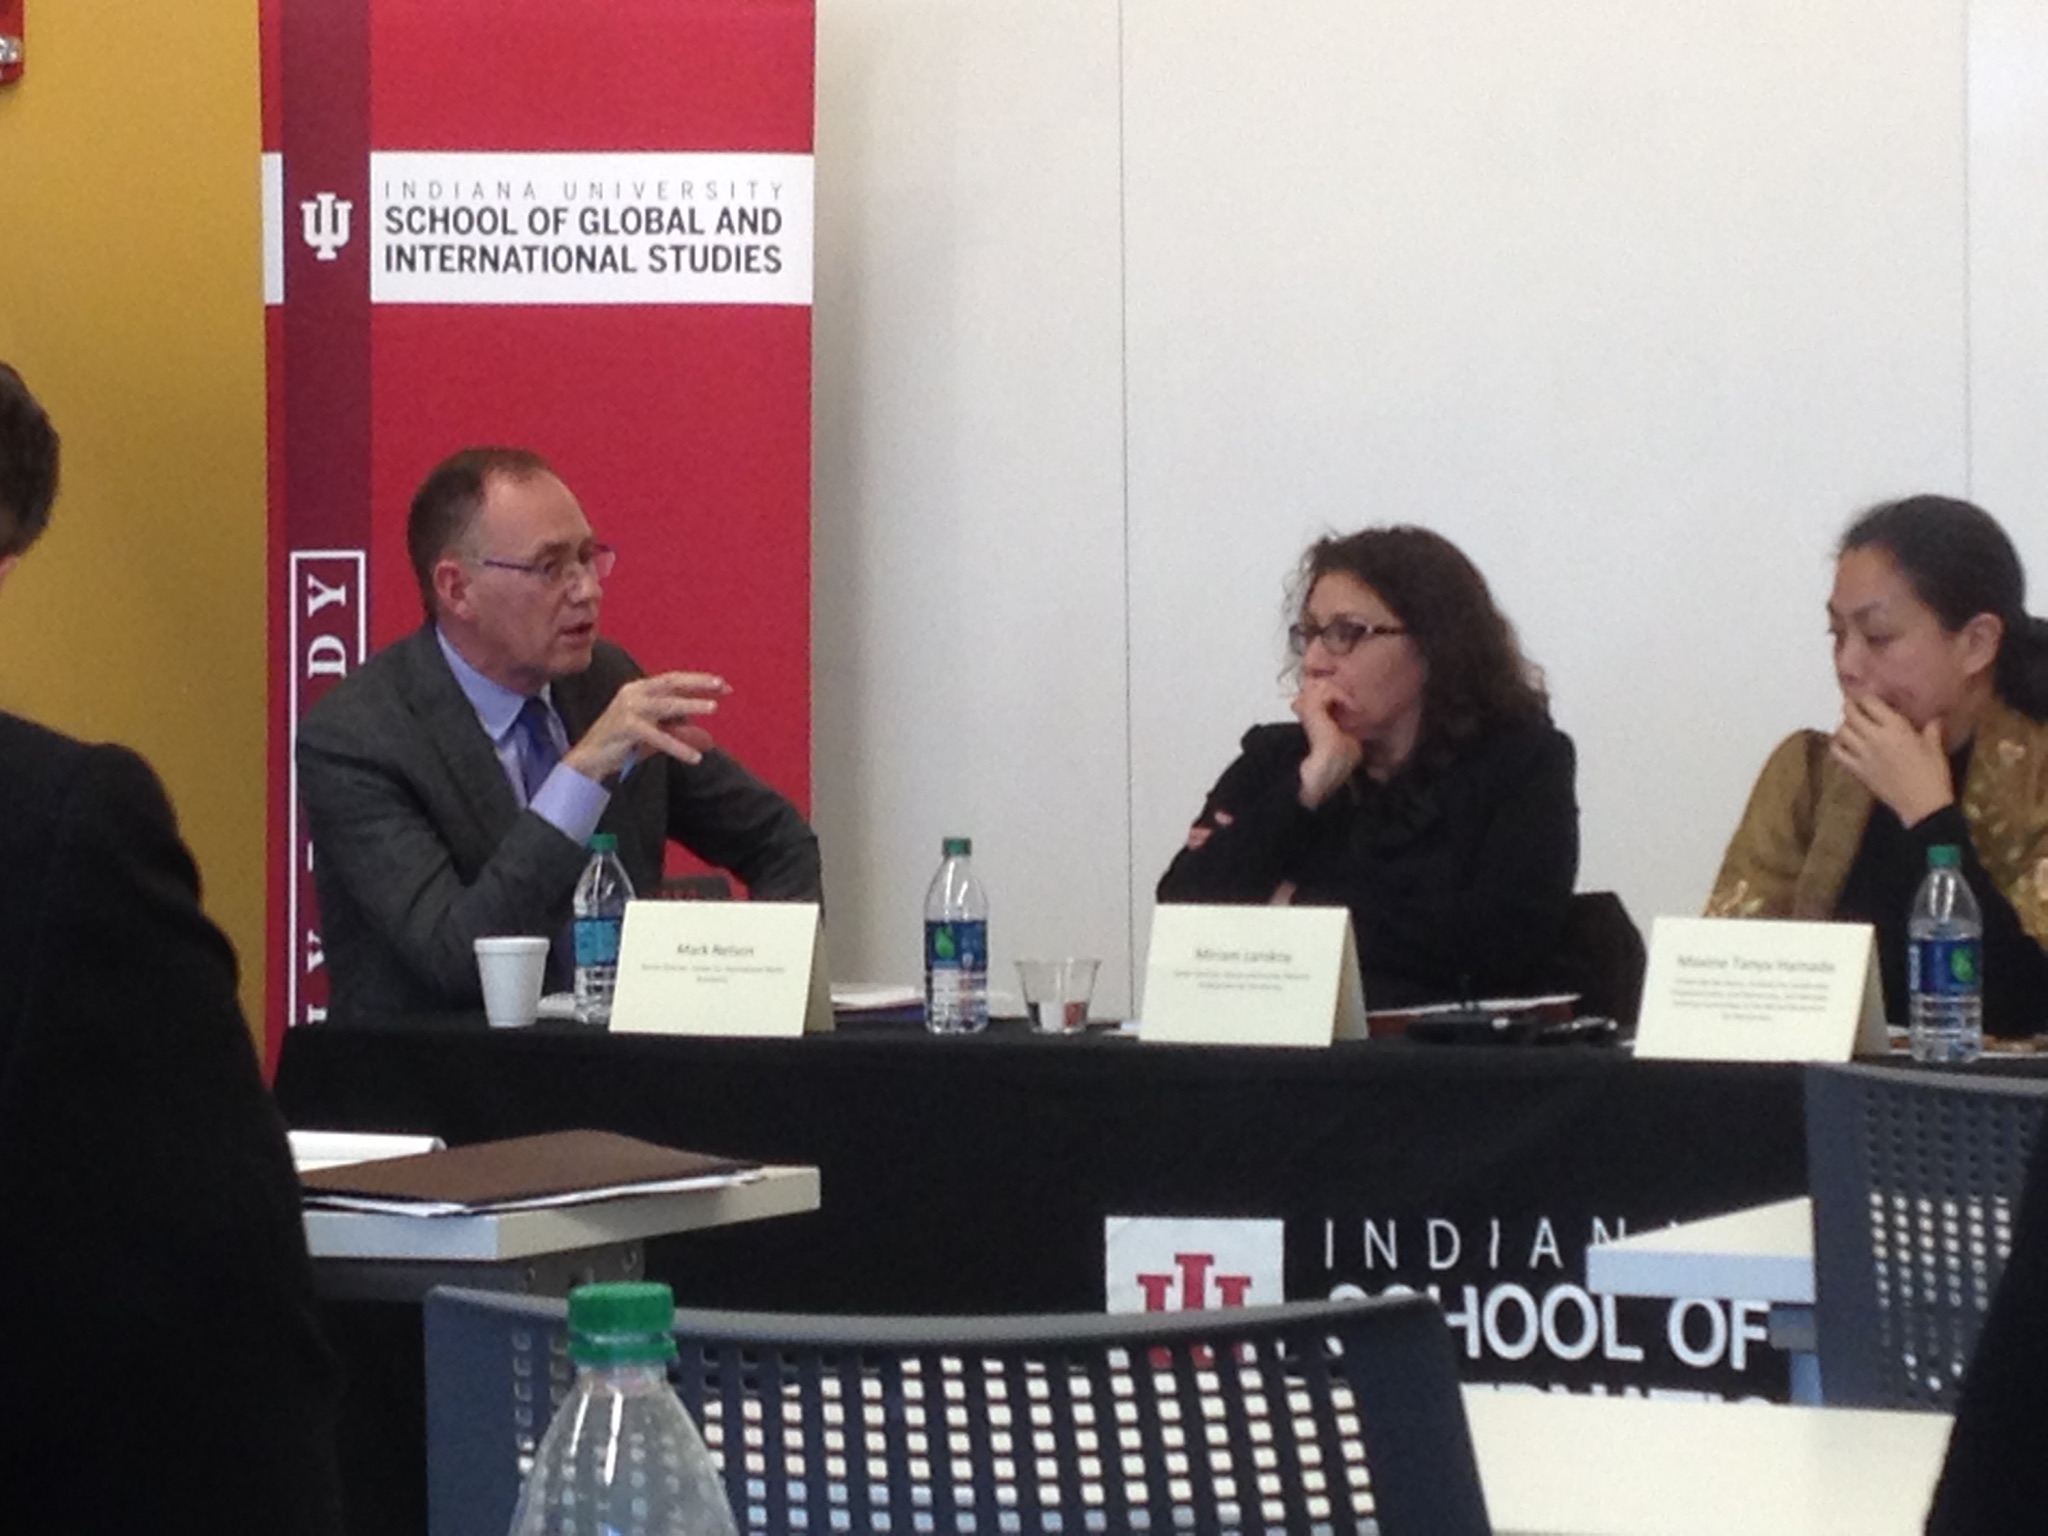 Left to Right: Mark Nelson (Senior Director or CIMA and panel moderator);  Miriam Lanskoy (Senior Director of Russia and Eurasia at NED); Maxine Tanya Hamada (Reagan-Fascell Fellow at NED)